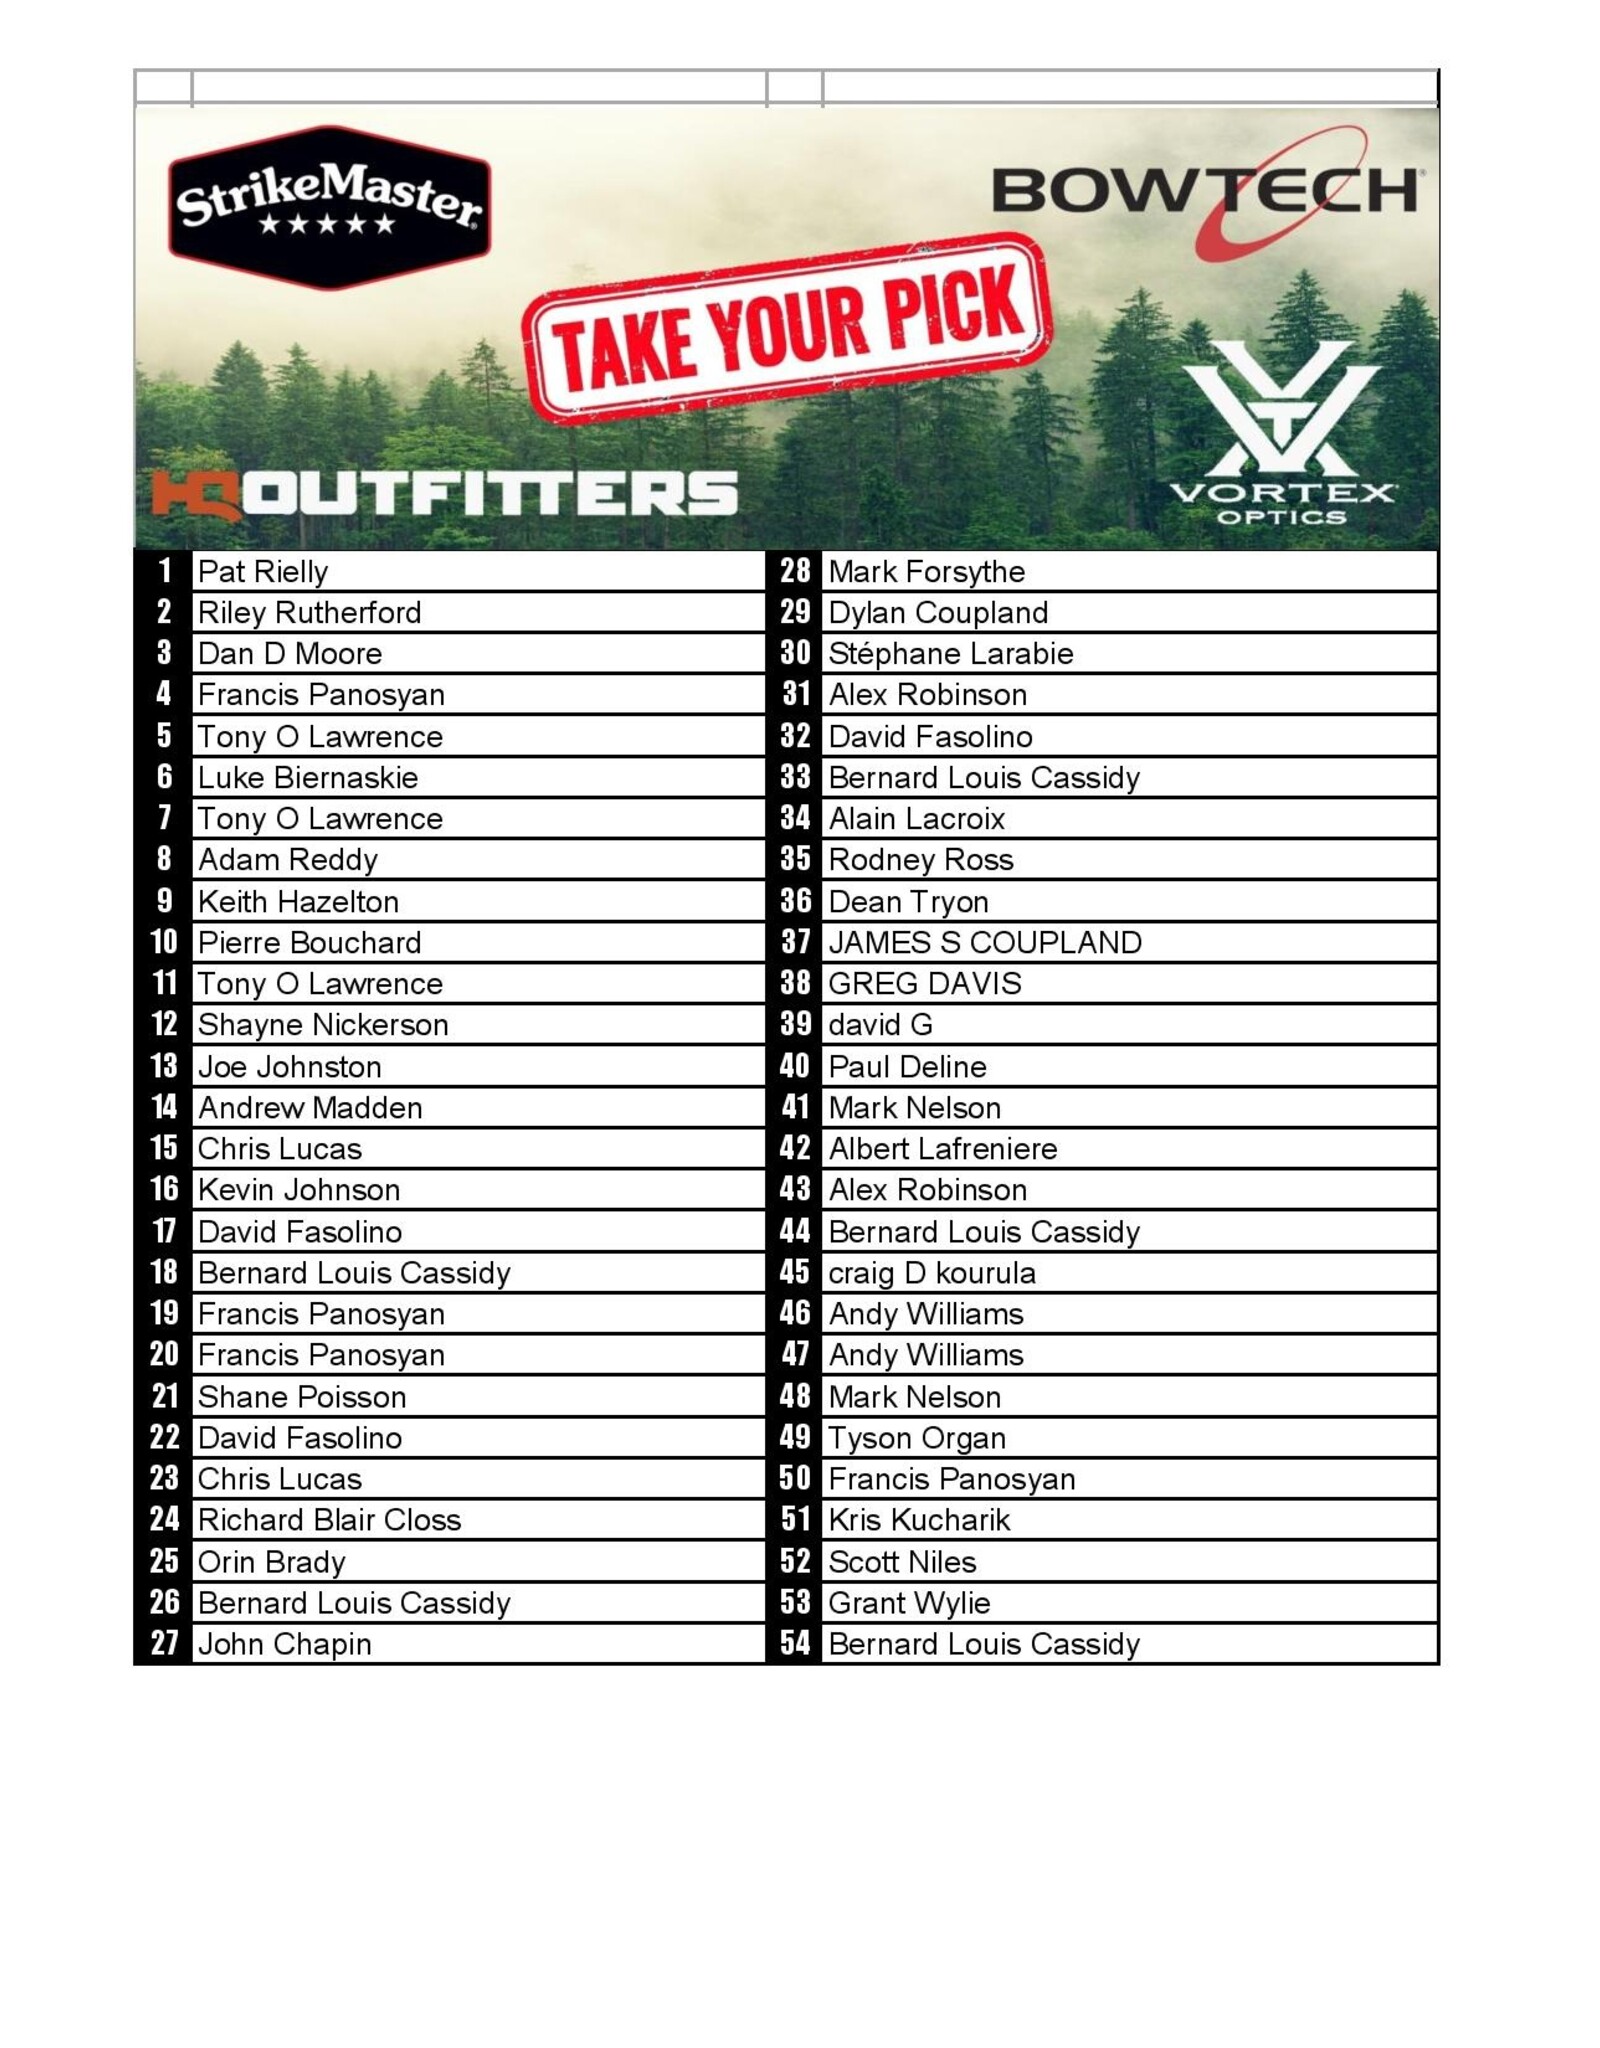 DRAW #1272 - Take Your Pick - StrikeMaster, HQ Outfitters, Bowtech OR Vortex